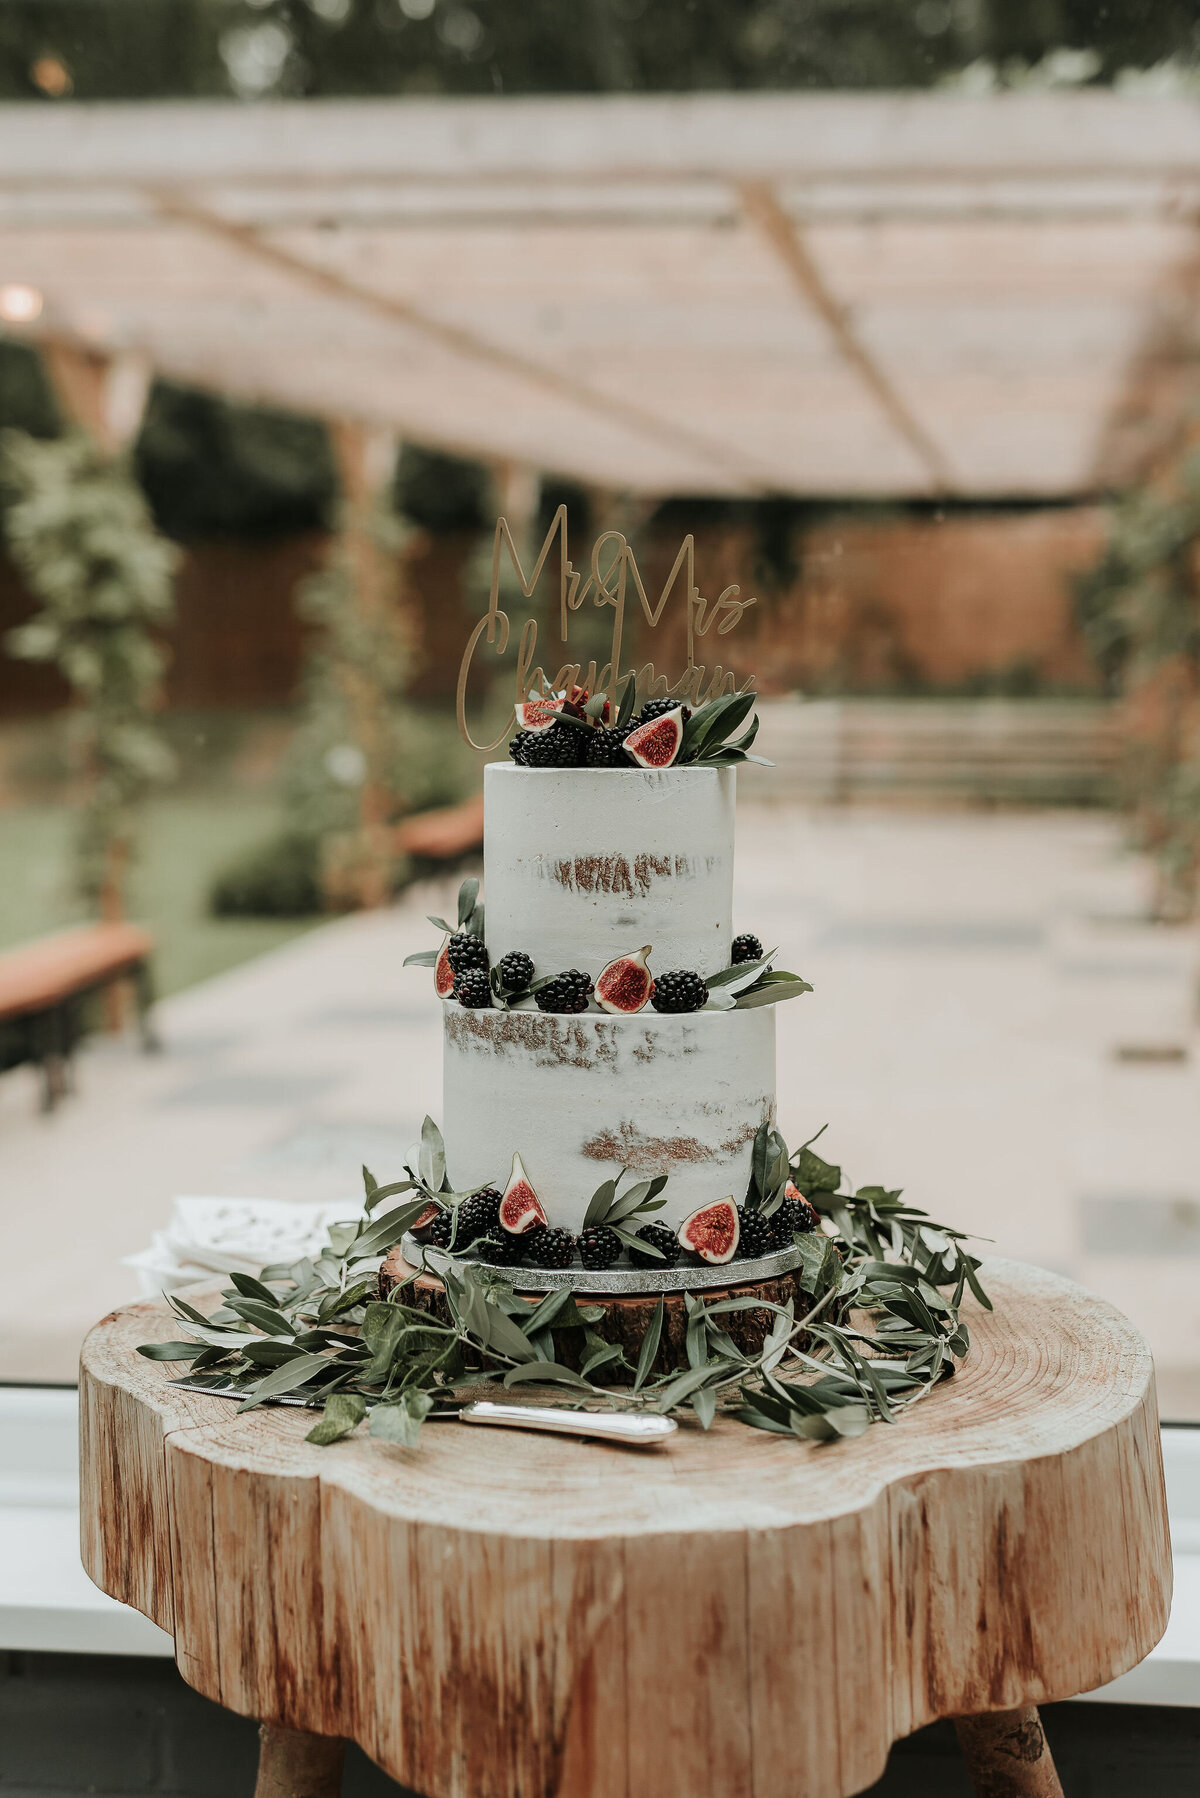 Rustic two tier wedding cake with figs and dark berries